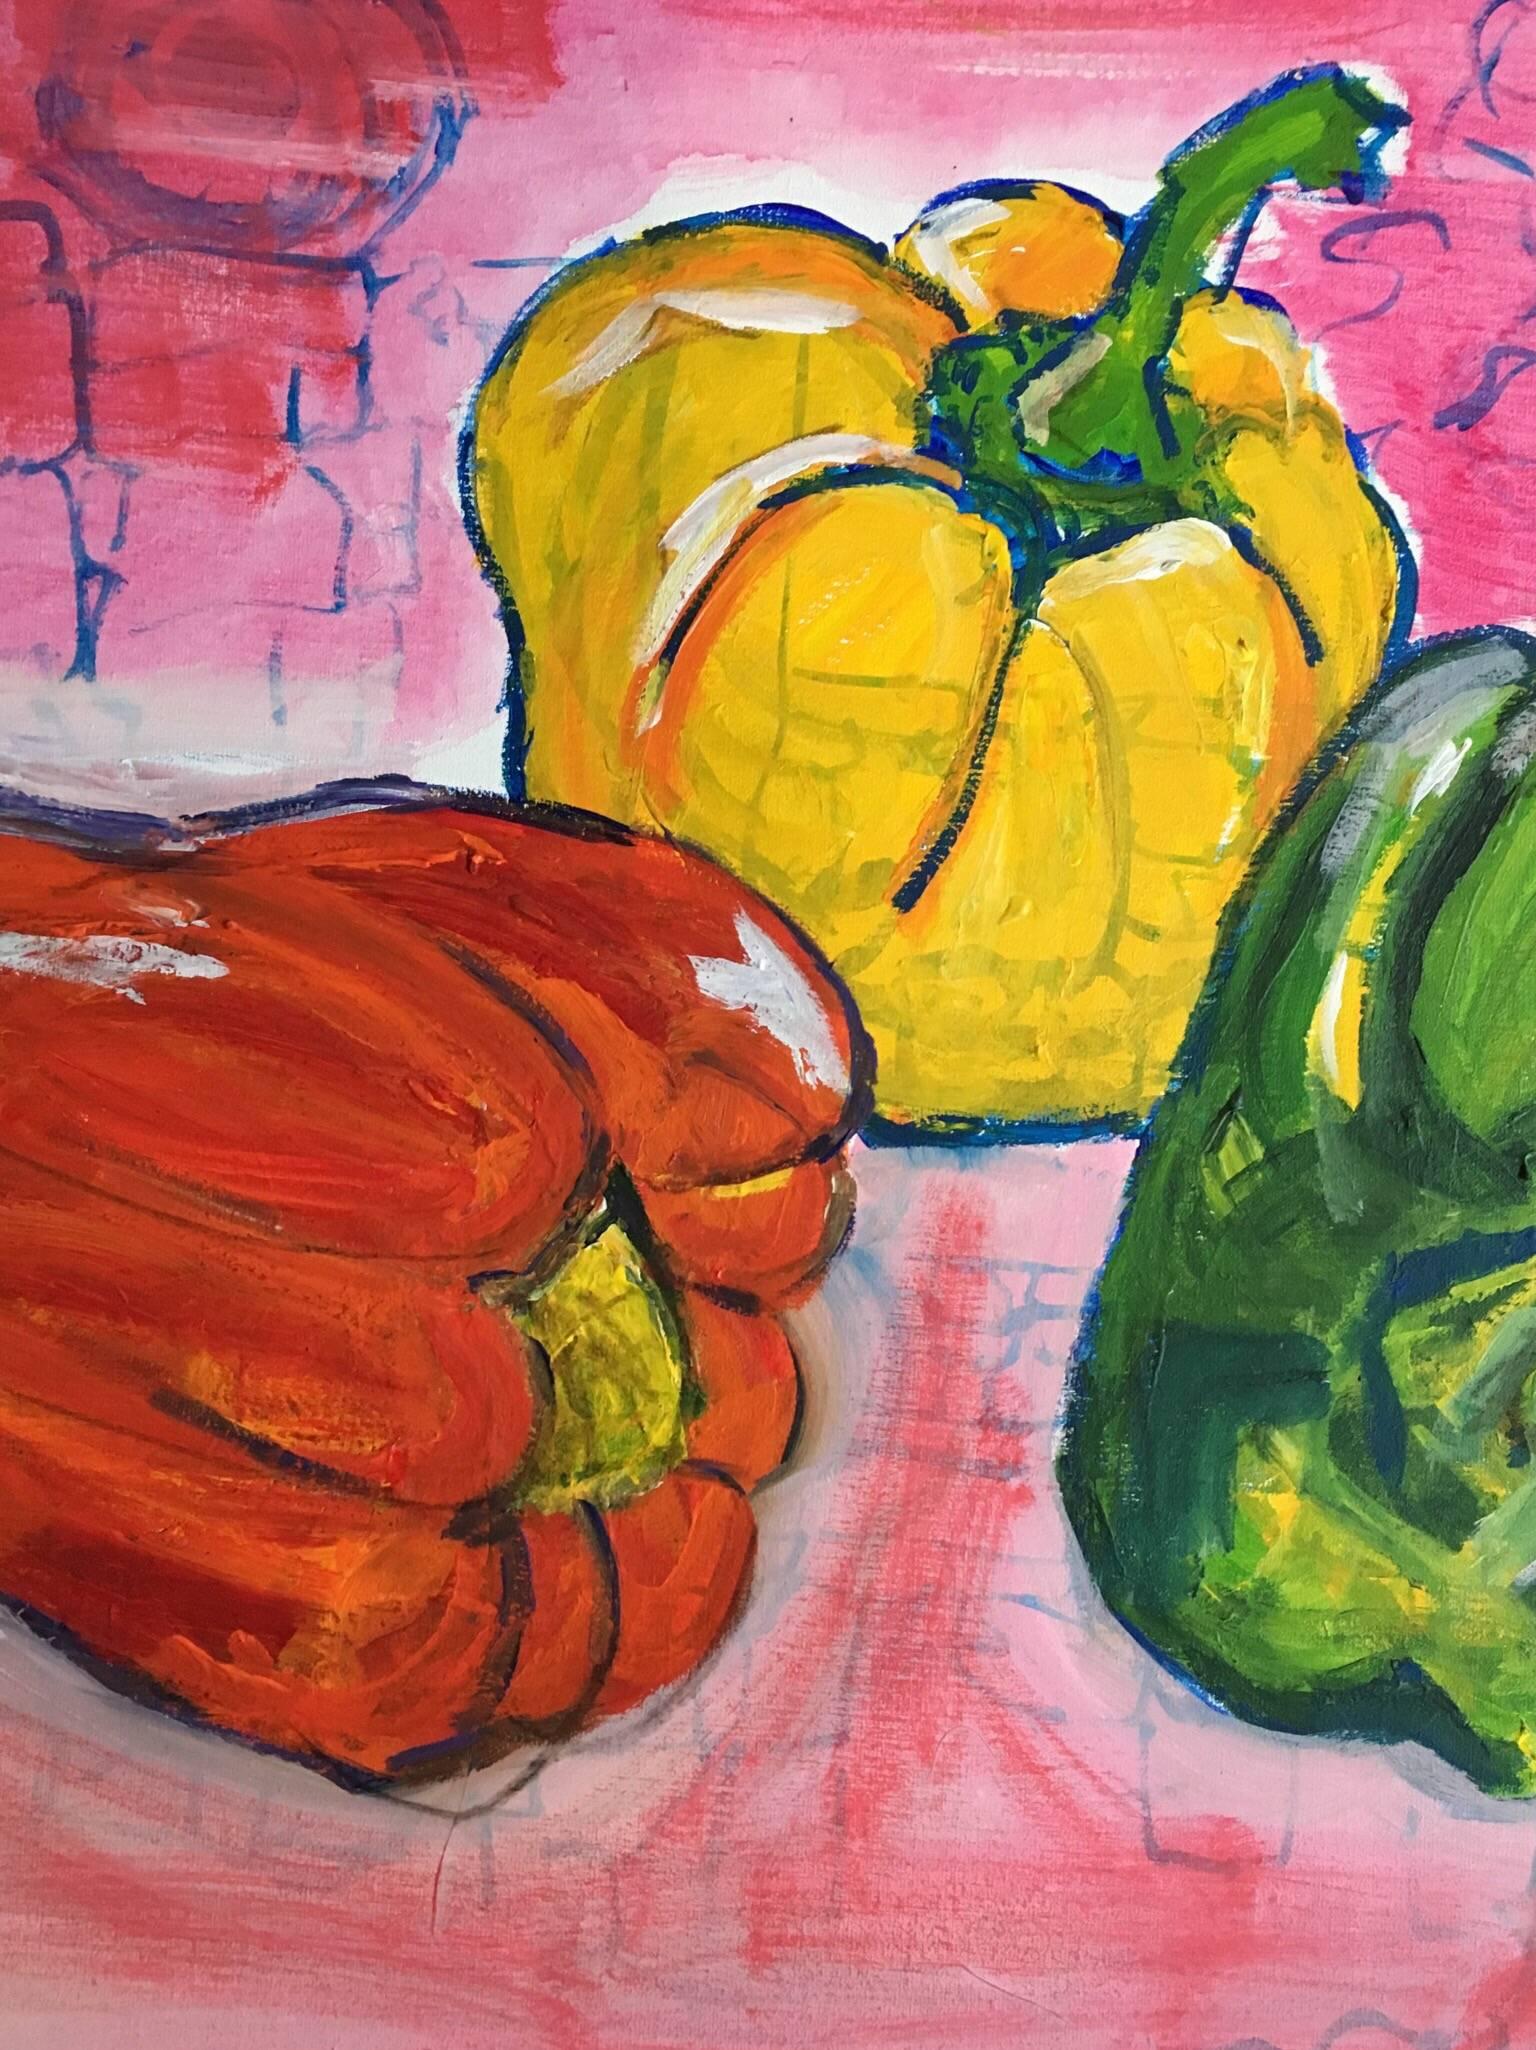 Homegrown Peppers, Still Life, British Artist
by Pamela Cawley, British 20th century
oil painting on canvas, unframed

canvas: 27.5 x 27.5 inches 

Stunning original Impressionist oil painting by the 20th century British artist, Pamela Cawley. The